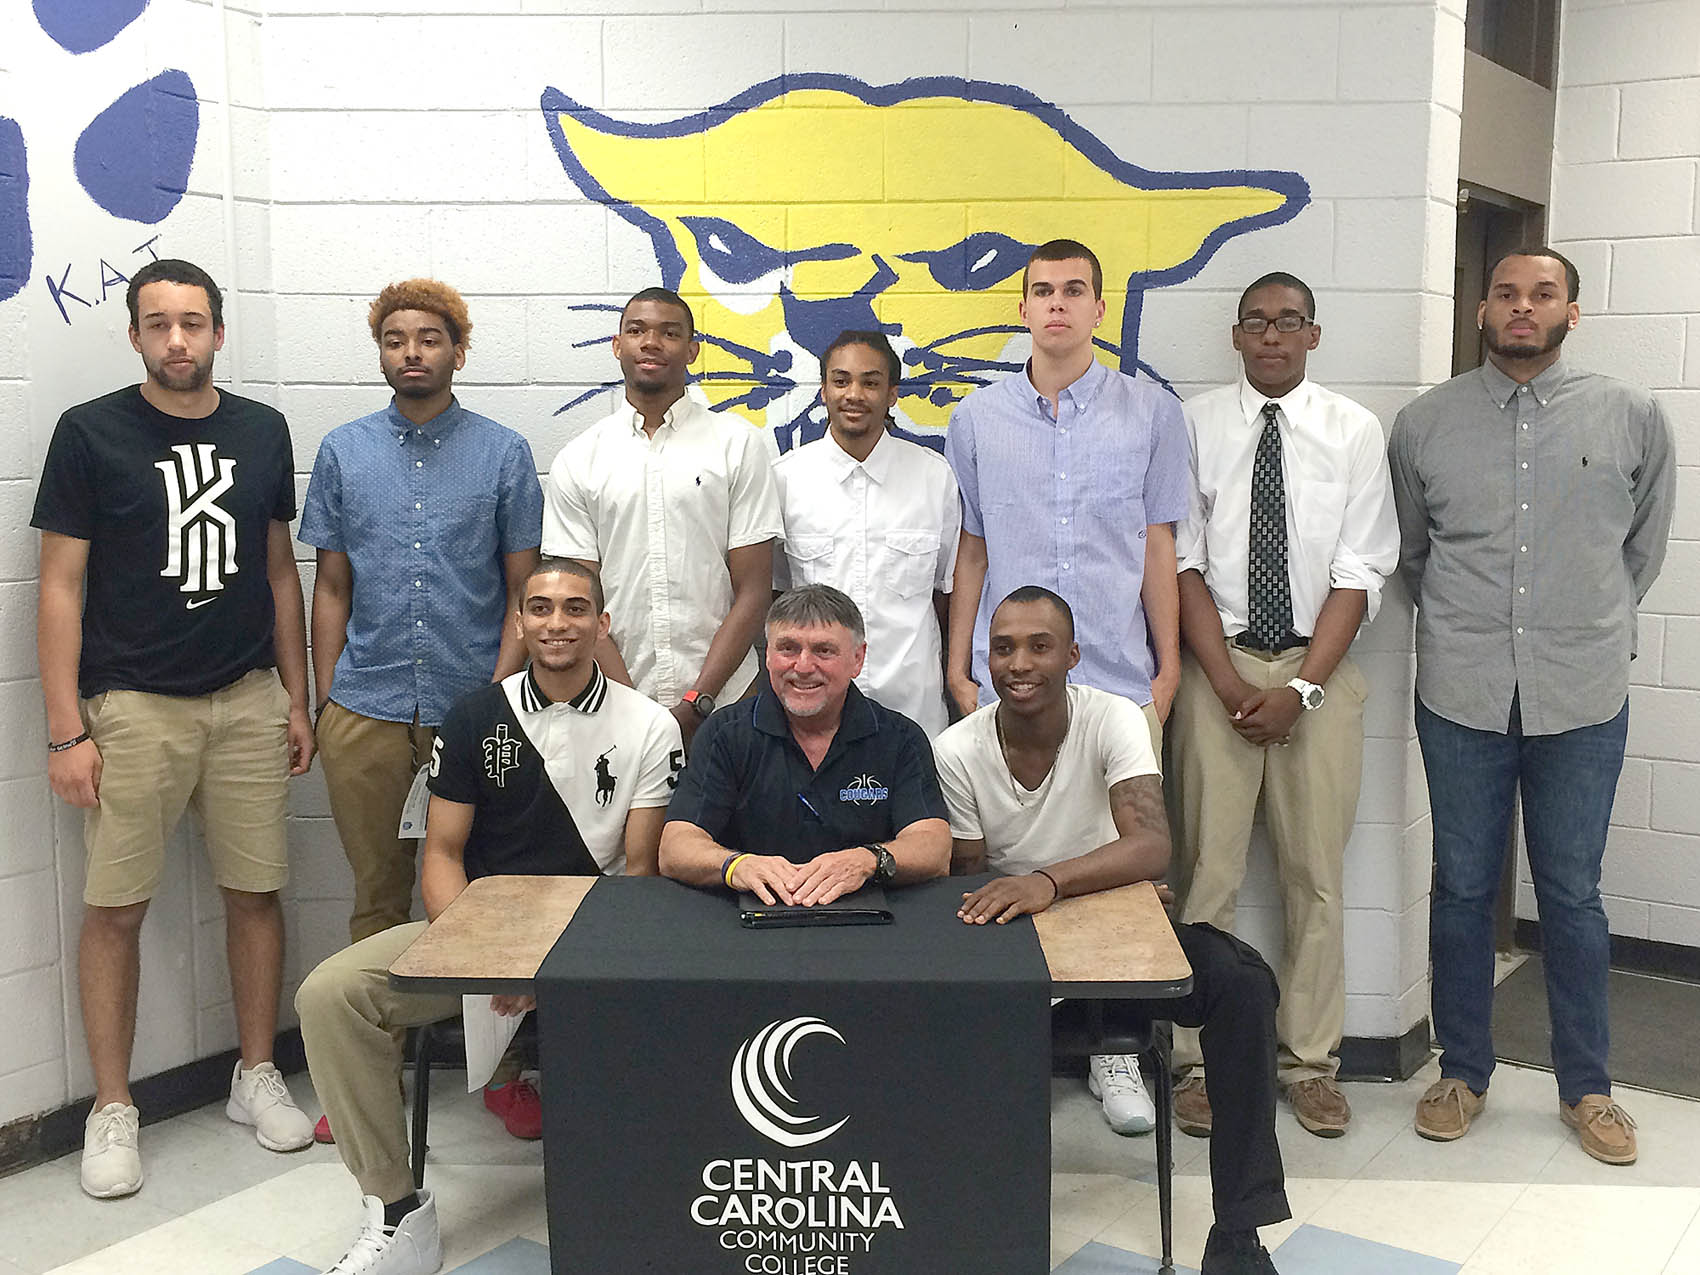 Click to enlarge,  Andrew Giermak, The Sanford Herald   Central Carolina Community College welcomed nine new basketball recruits as they signed with the Cougars April 27. Seated from left is DaShaun Boswell, head coach Doug Connor, Jared Foster, standing from left is Brice Harrison, Jamal Shuford, Avion Jordan, Greg Patterson, Dalton Thomas, Isaiah Monroe, and Jordan Lunsford. 